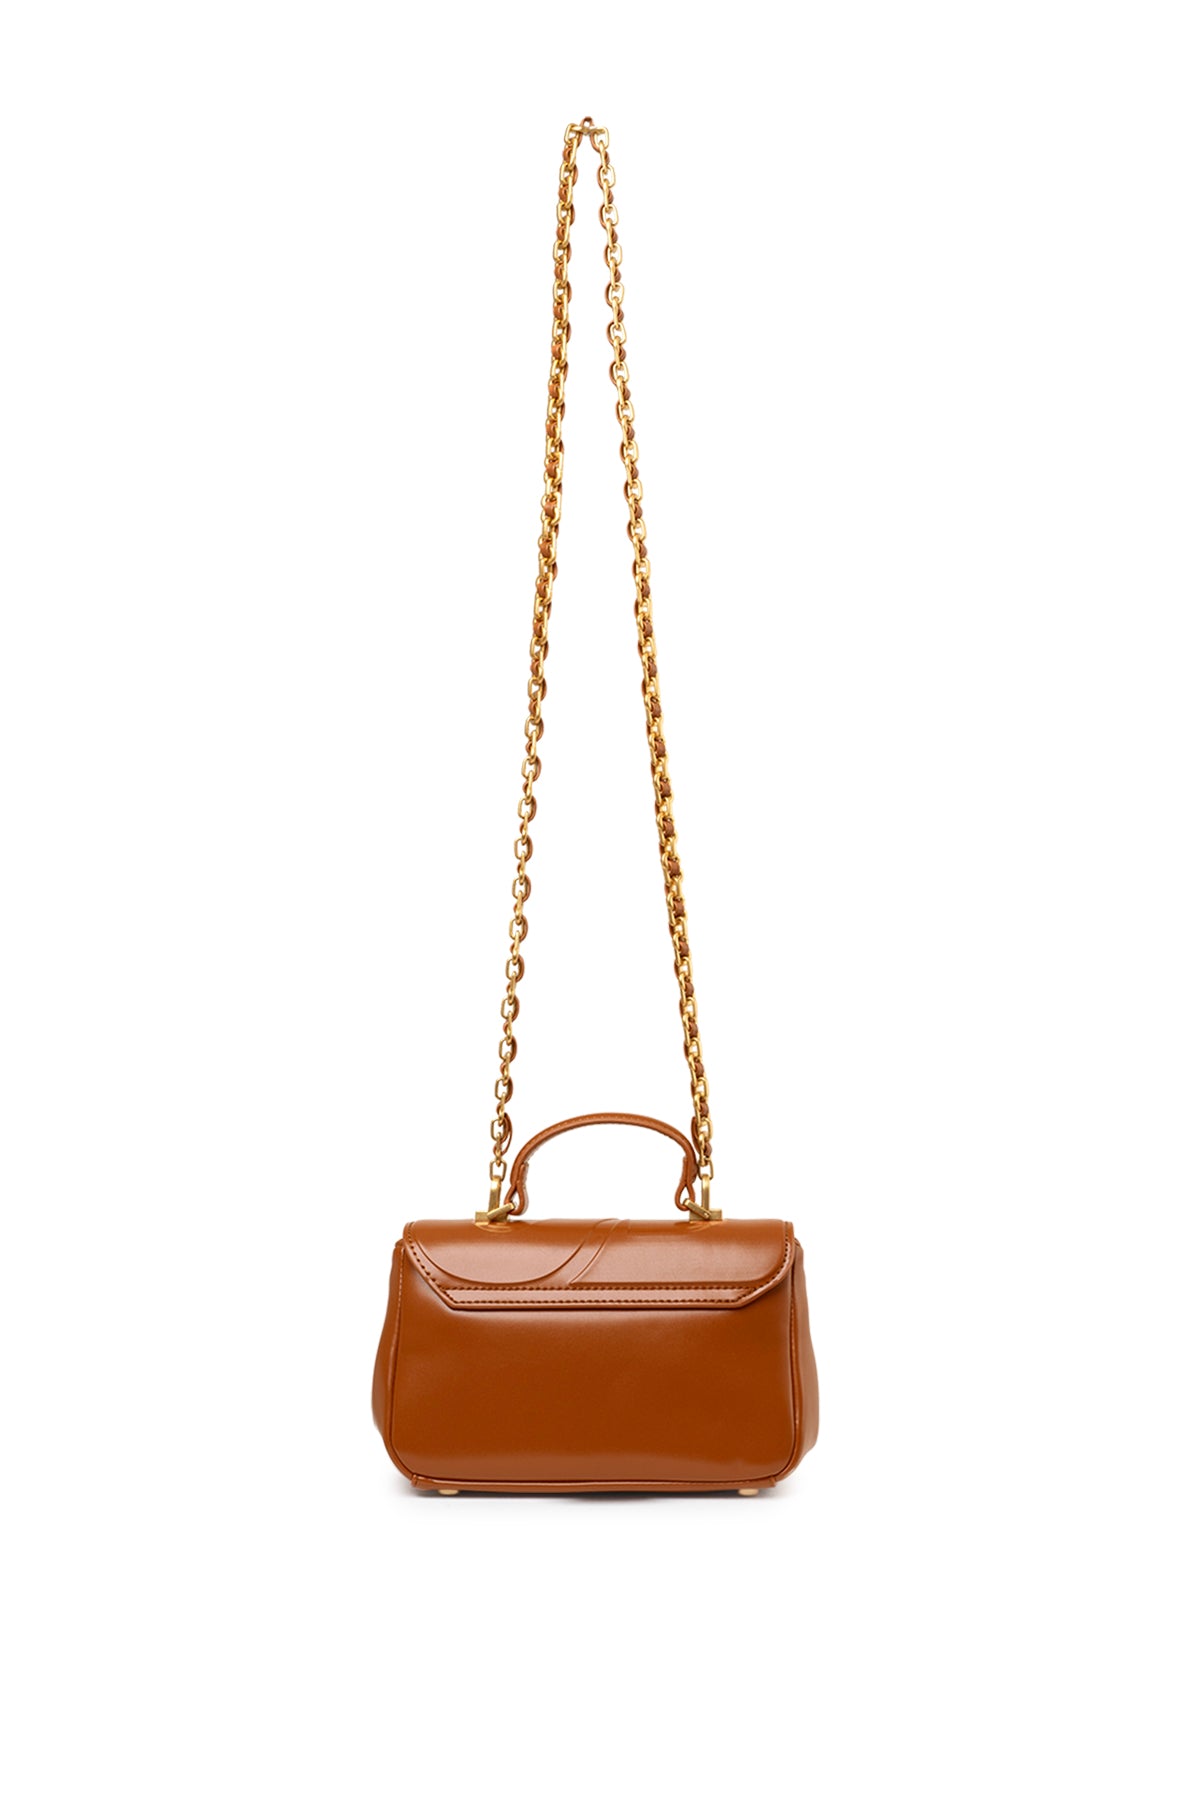 Alma Flap Bag Smooth Finish available at Buttonscarves Store